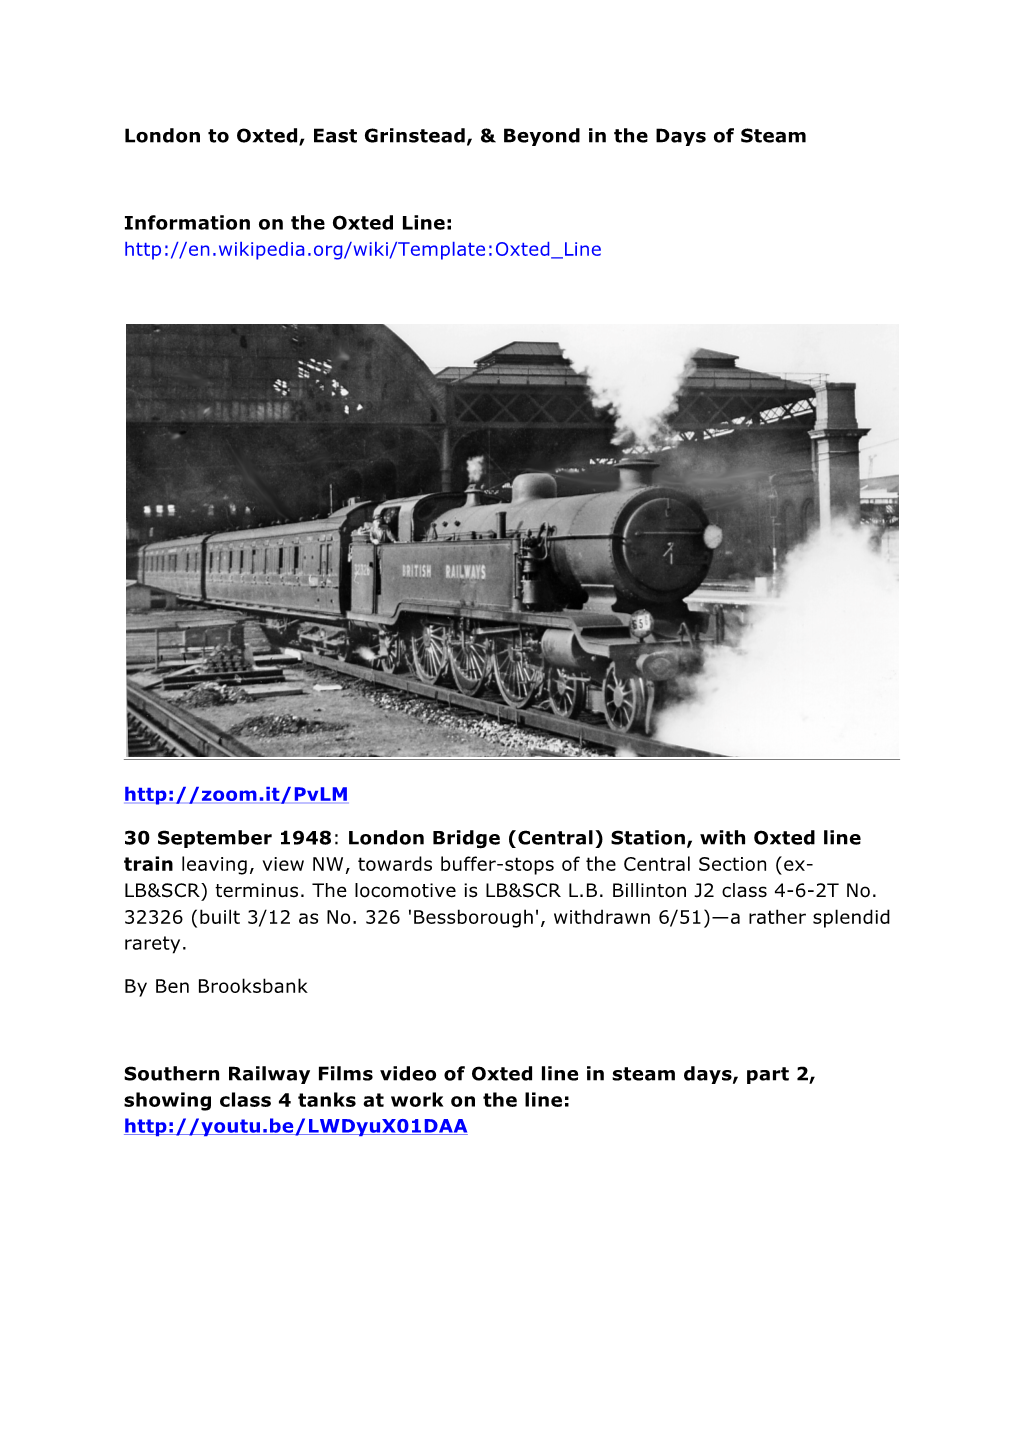 London to Oxted, East Grinstead, & Beyond in the Days of Steam Information on the Oxted Line